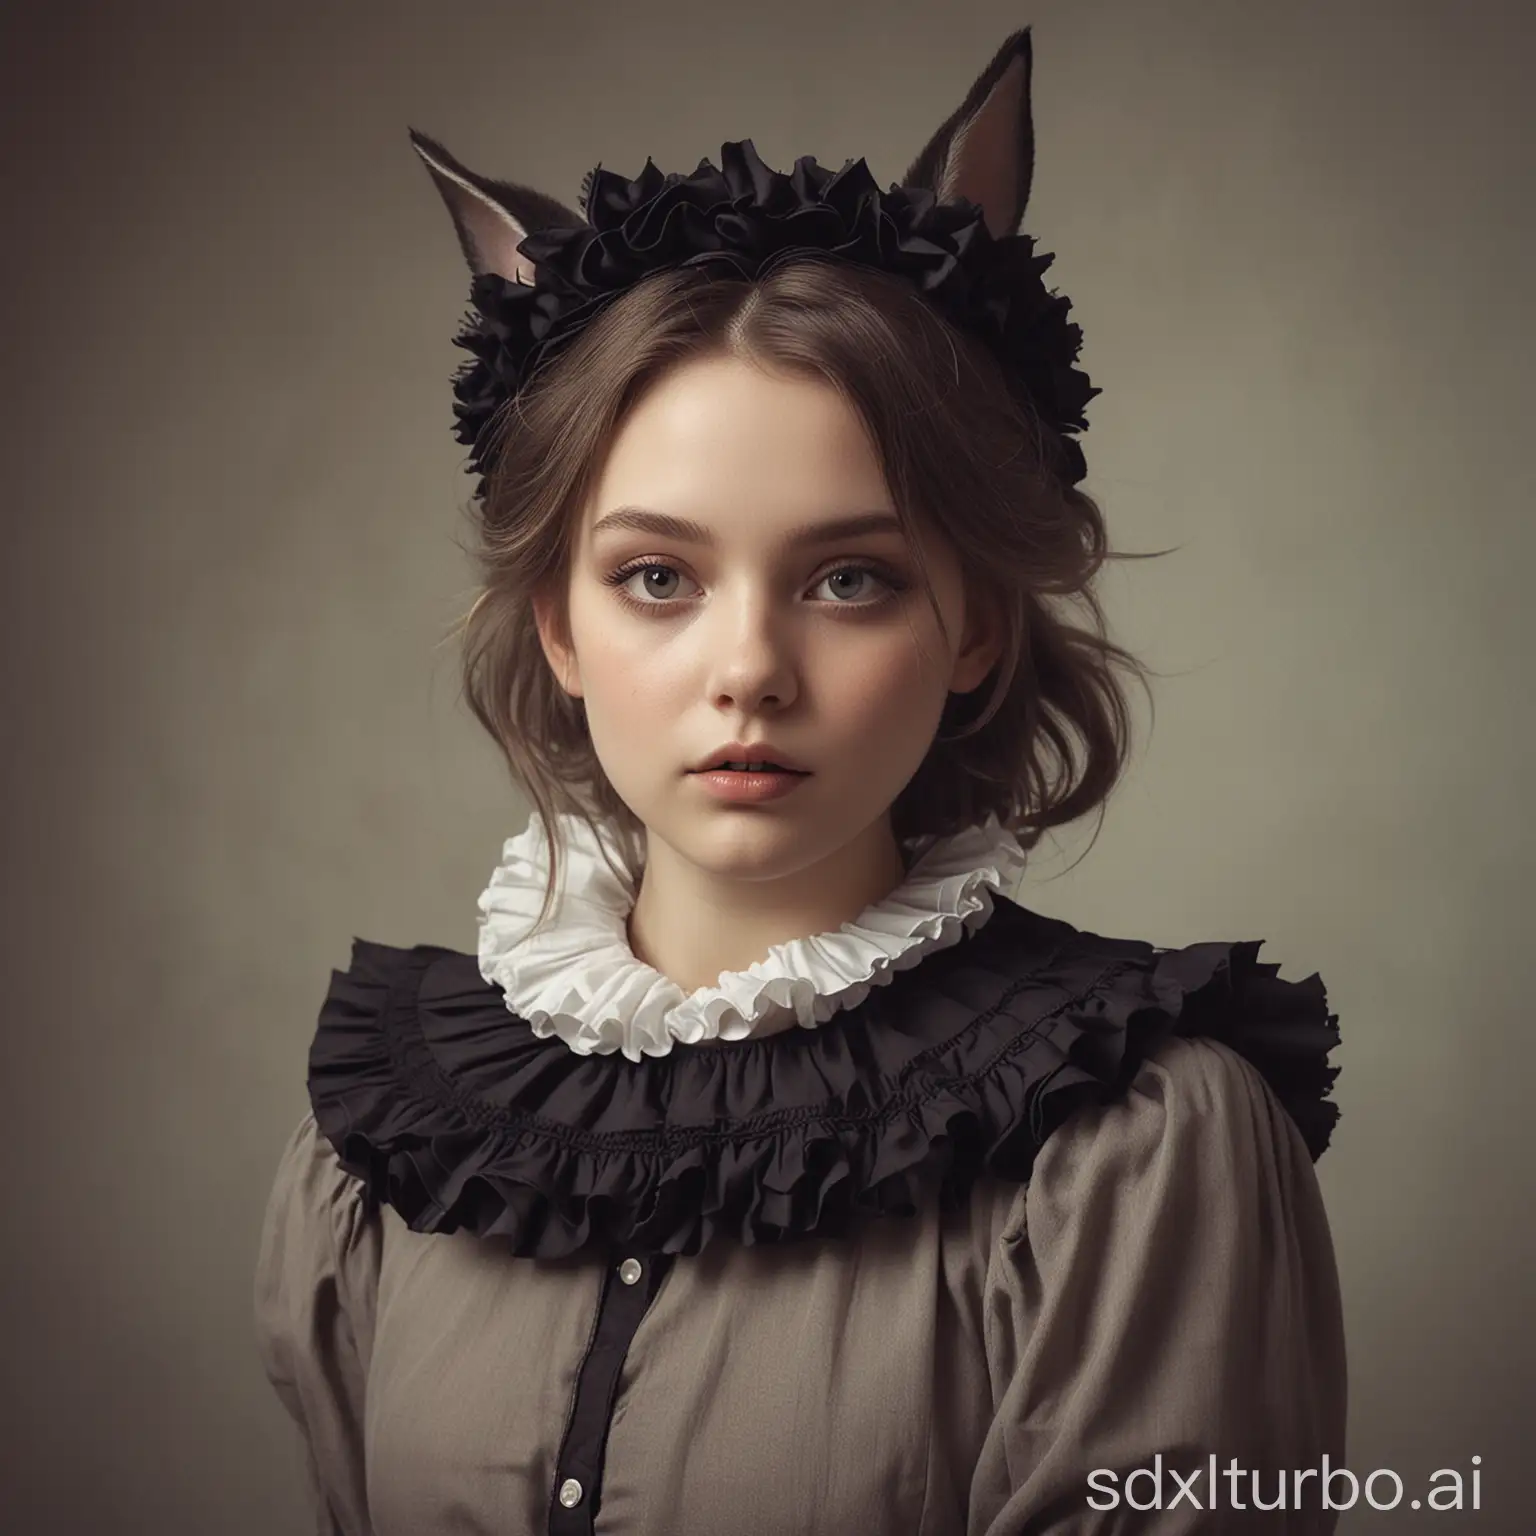 a Bunny girl with ruffled collar wearing black crown. The style of the photograph is in the fashion photography genre, showcasing soft lighting and a muted color palette, giving it an ethereal feel